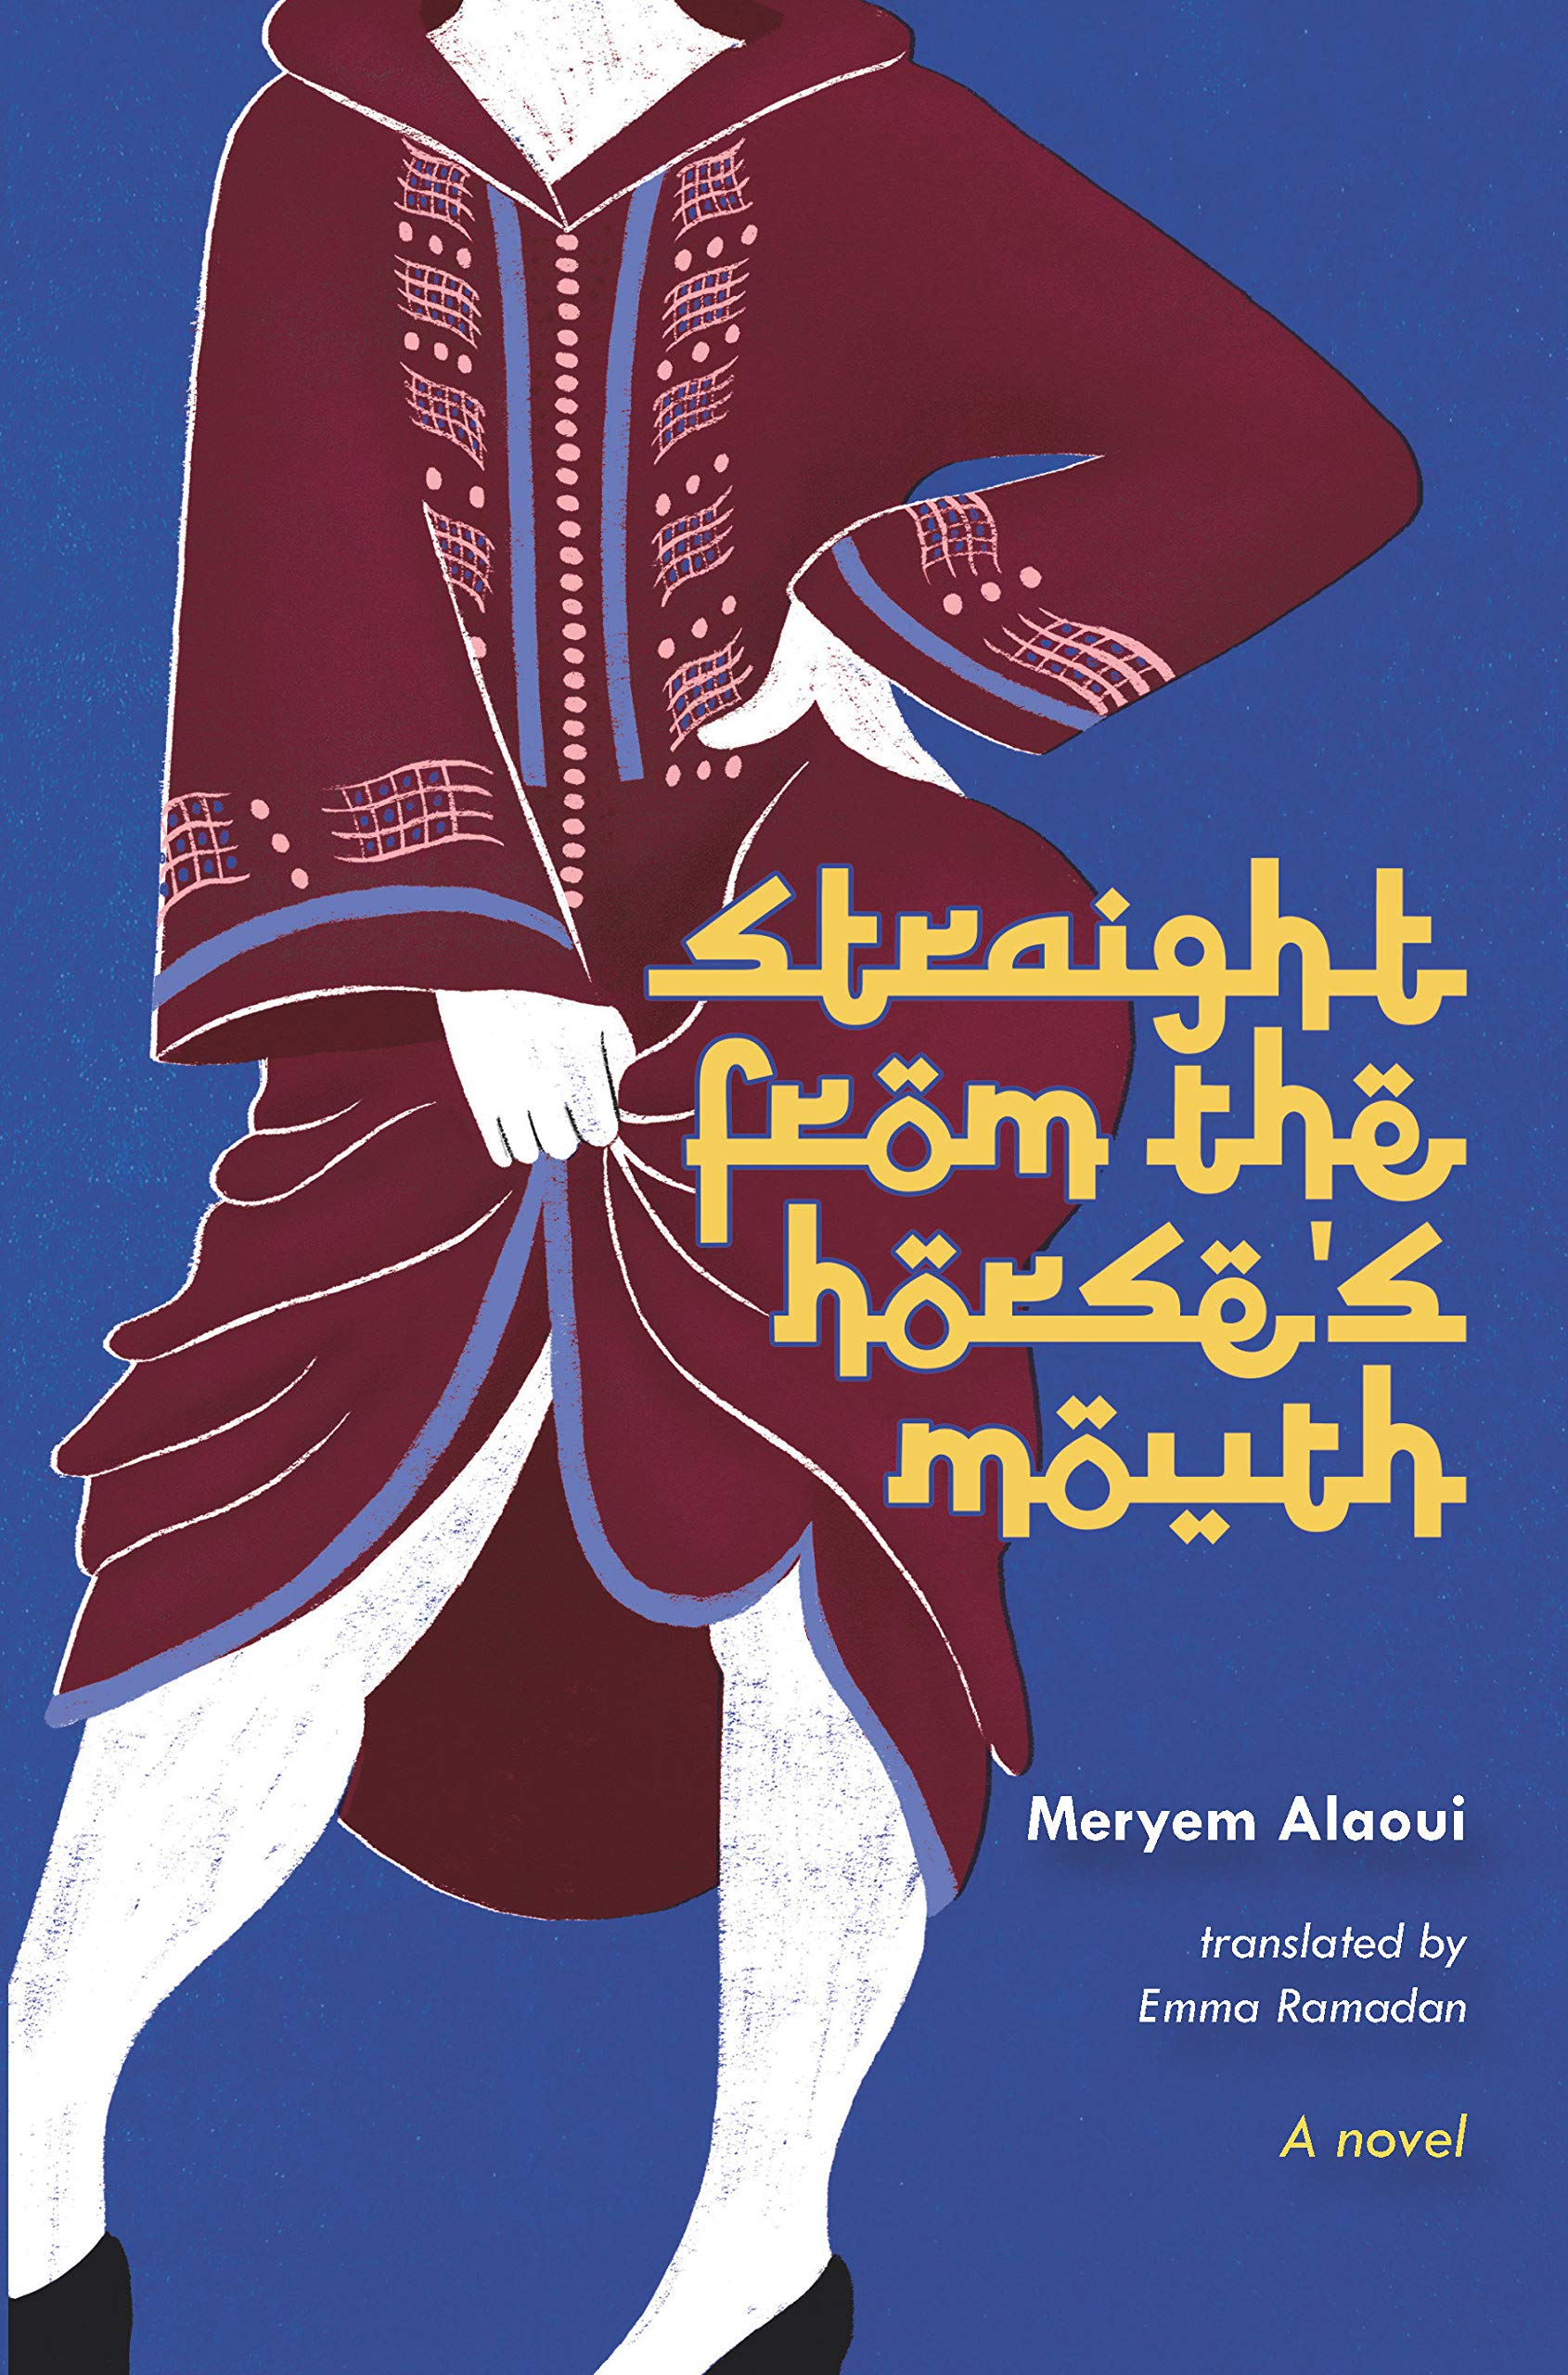 Cover of Meryem Alaoui's "Straight from the horse's mouth", translated into English by Emma Ramadan (published by Other Press)